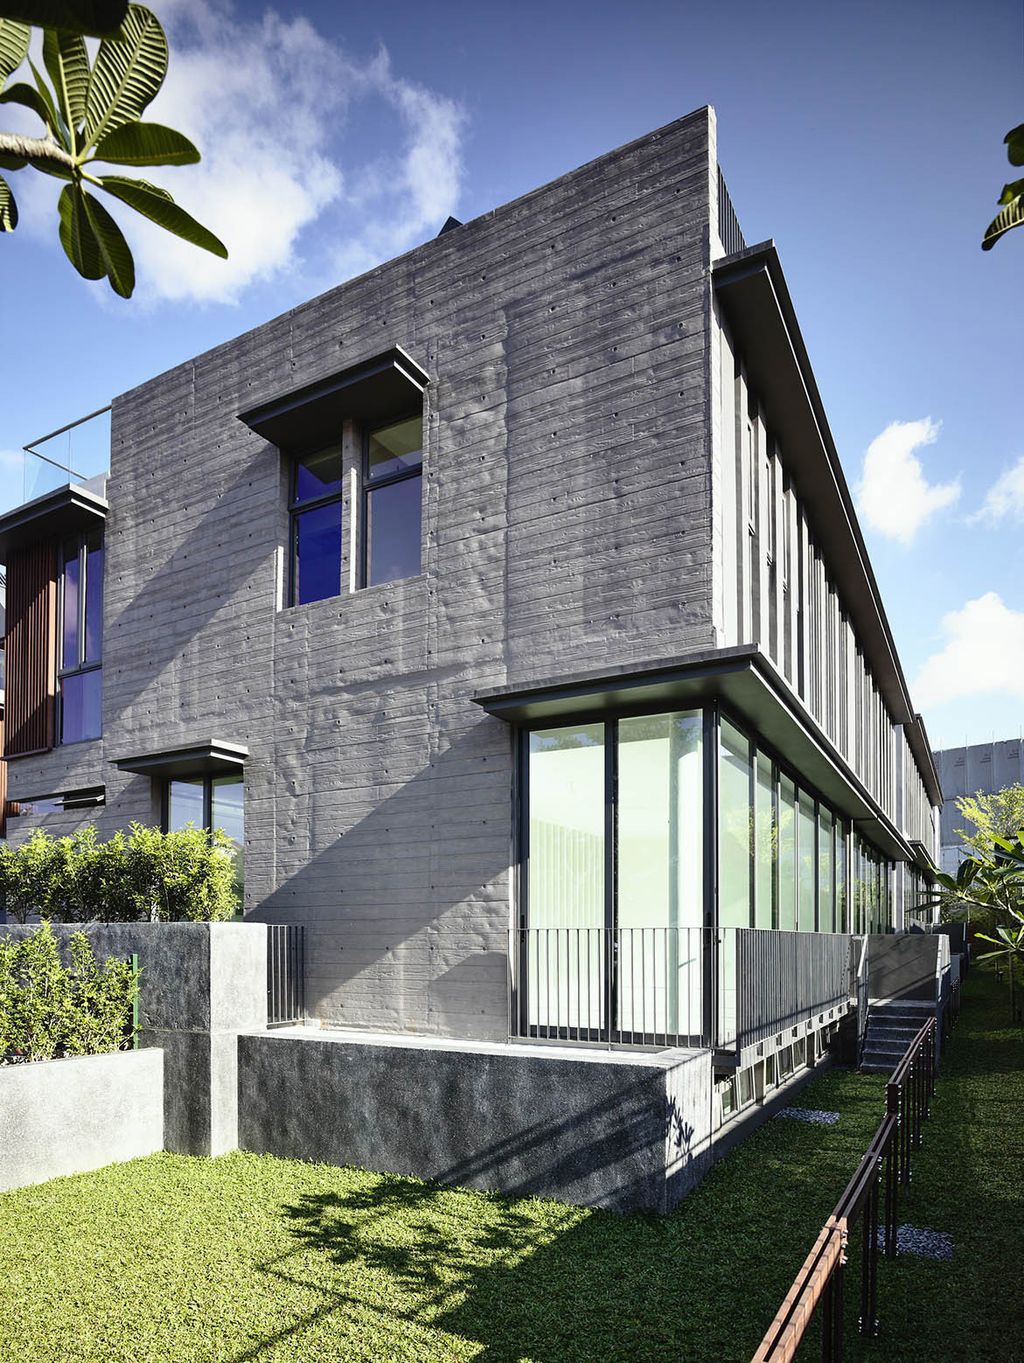 Toh-Crescent-a-Stunning-10-Unit-Cluster-of-Houses-by-HYLA-Architects-16